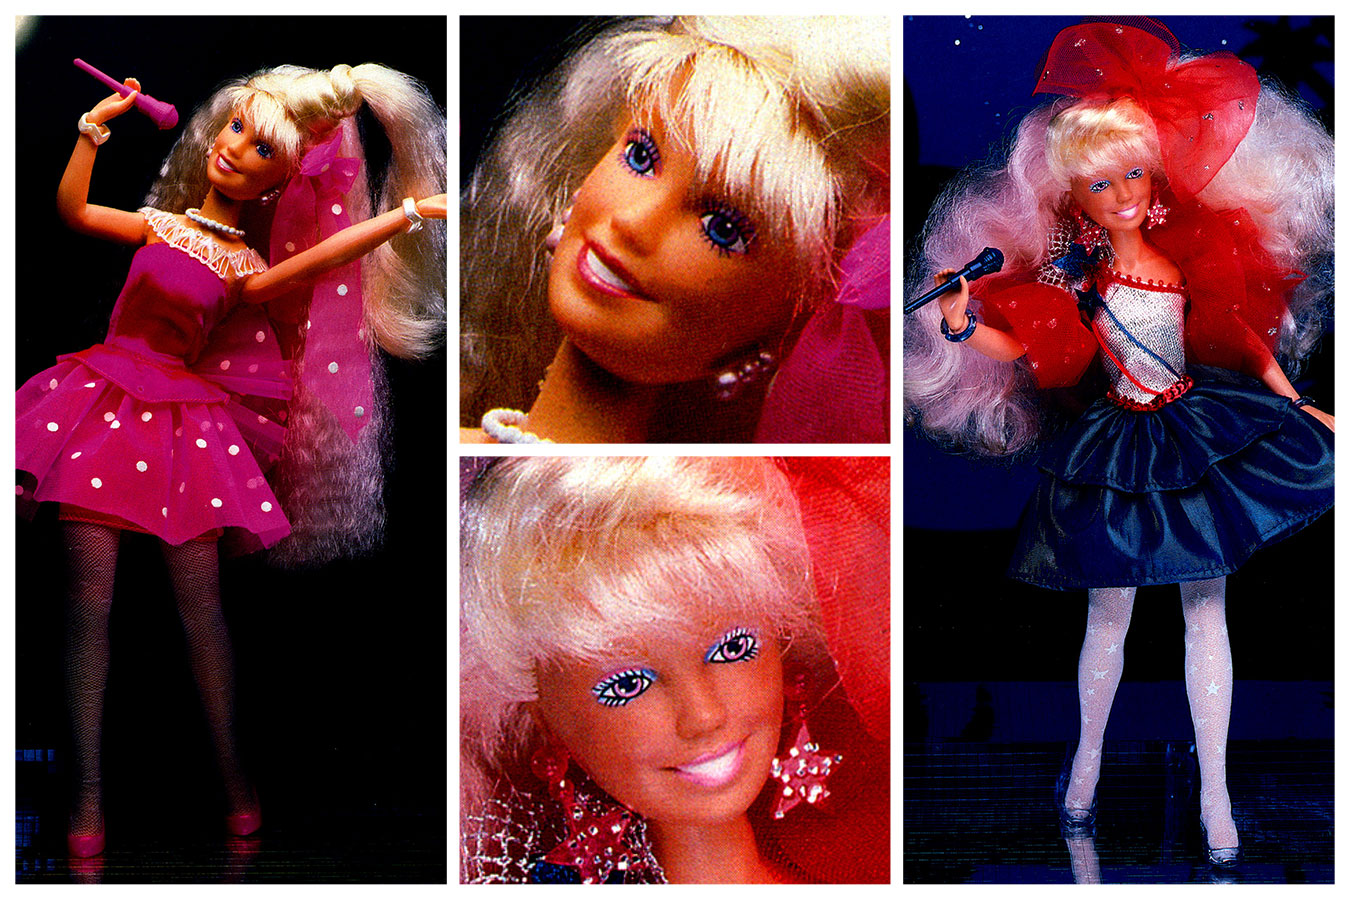 Rockin' Romance Jem 4004 and American Beauty Jem 4007 -- images from 1988 Hasbro Pre-Toy Fair Catalog